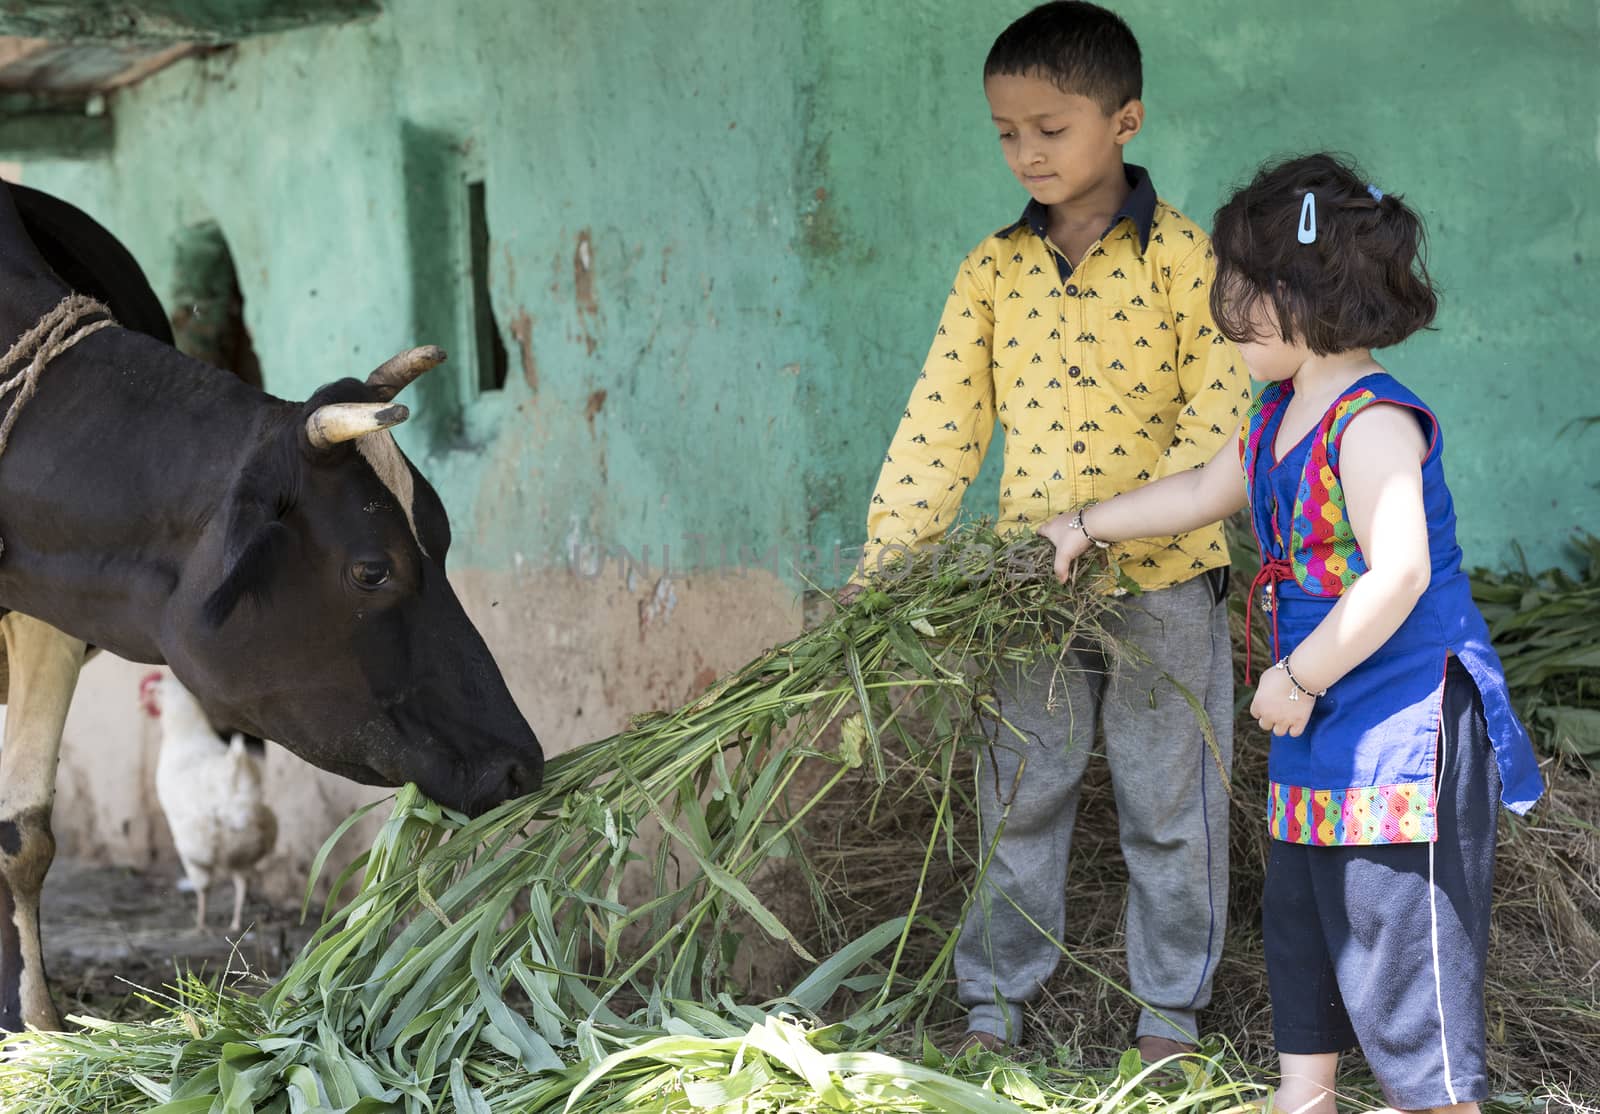 Little girl and boy feeding cow with grass. by dushi82